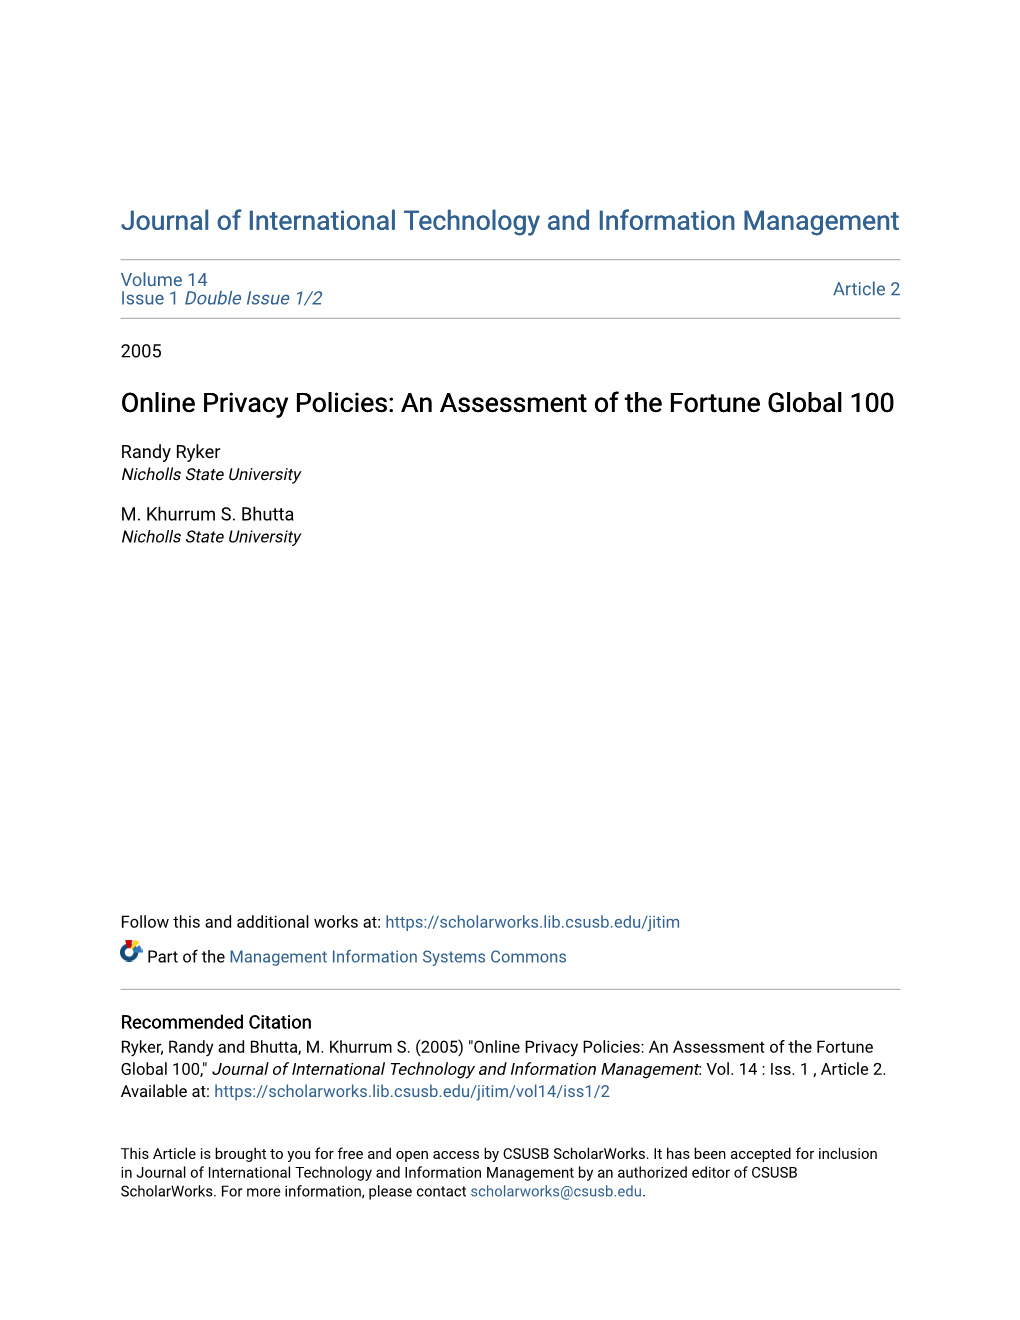 Online Privacy Policies: an Assessment of the Fortune Global 100